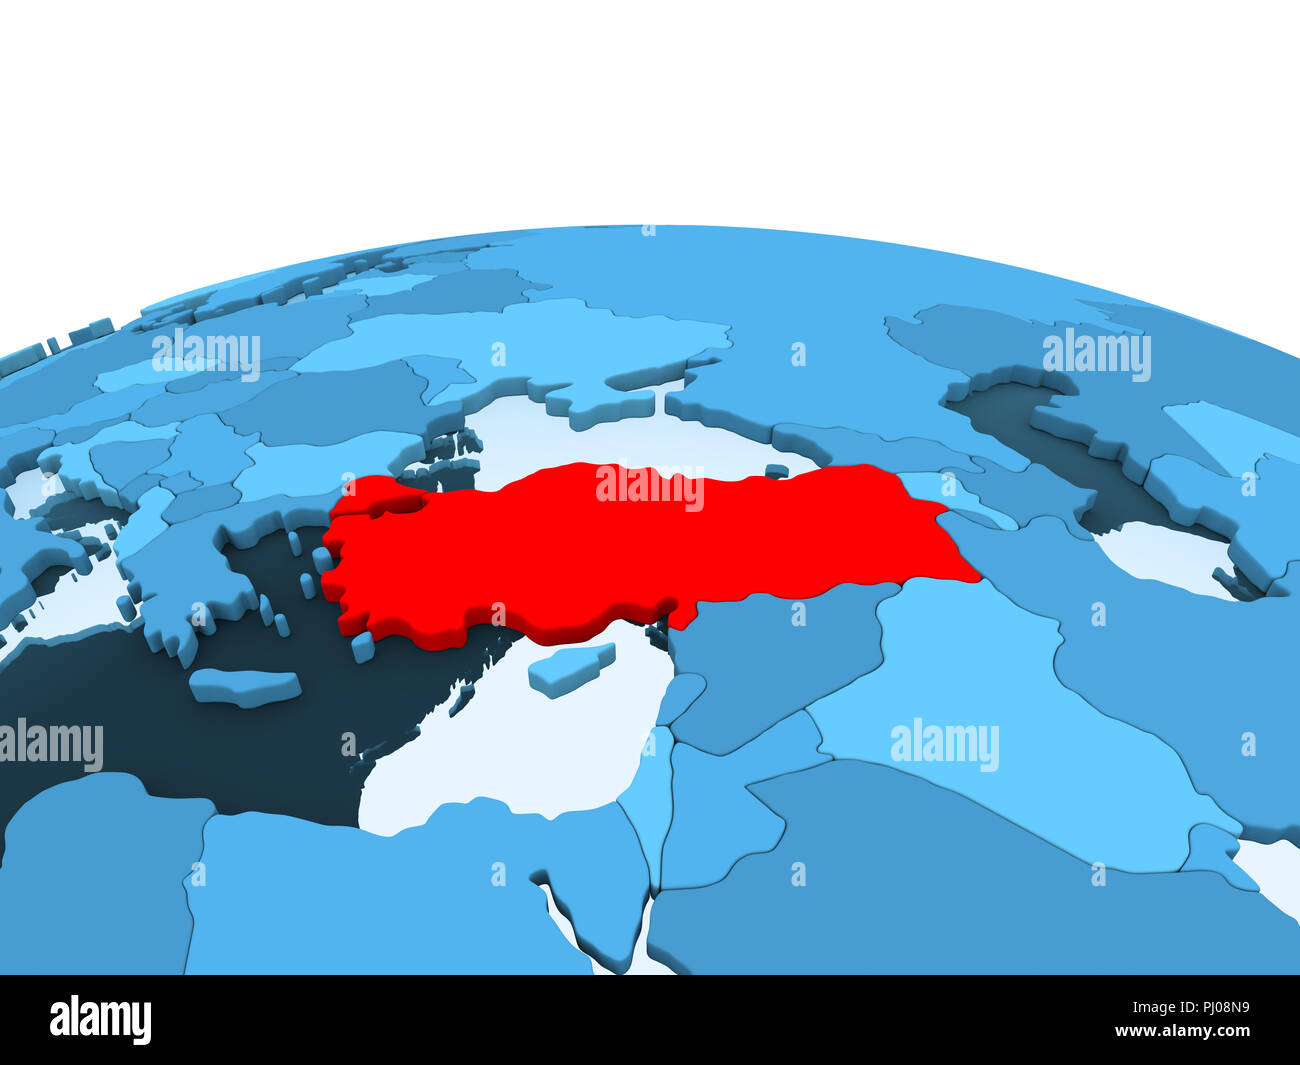 Map of Turkey in red on blue political globe with transparent oceans. 3D illustration. Stock Photo